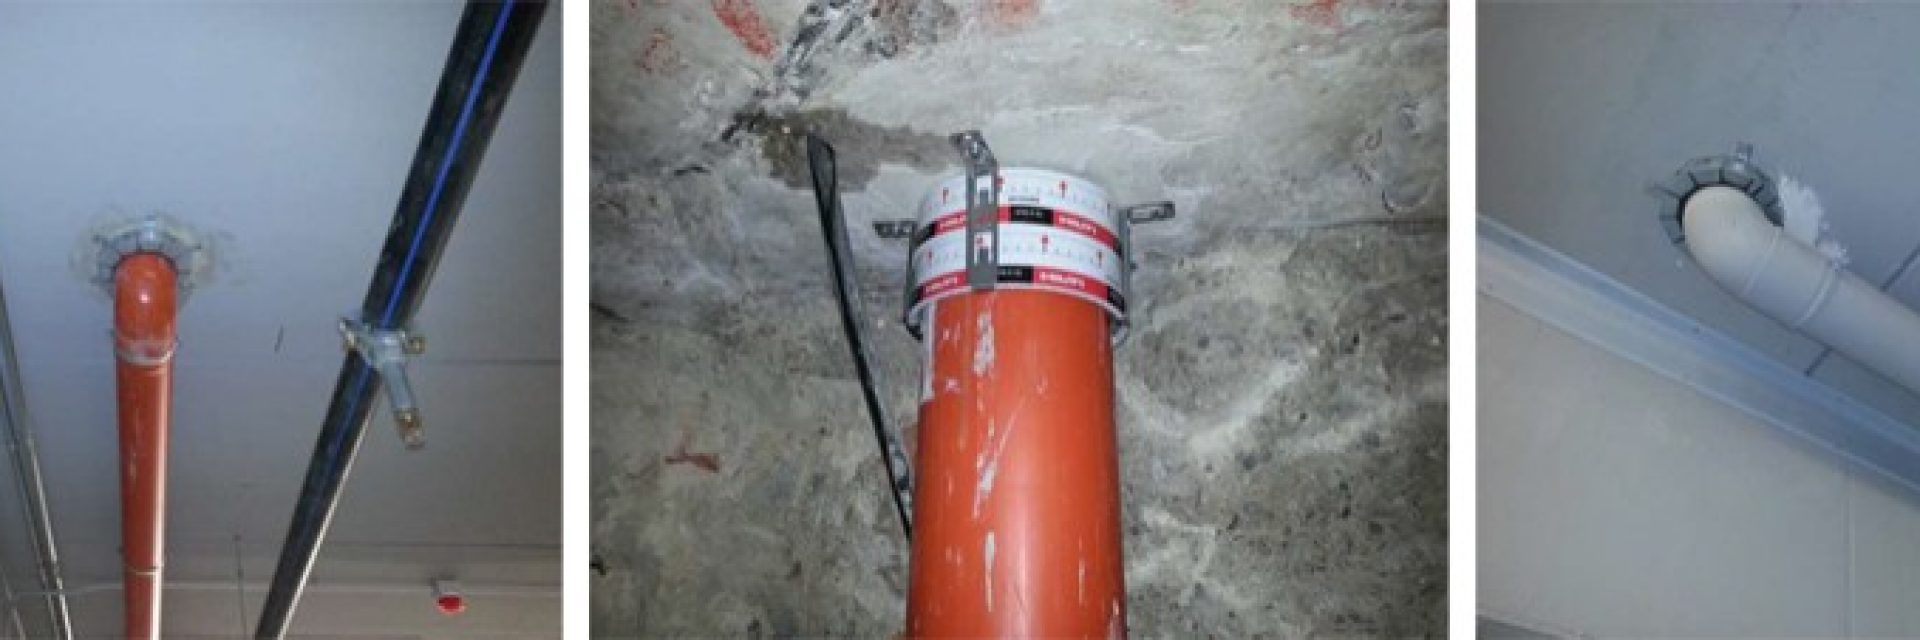 Hilti jobsite reference Bologna Central Station Italy